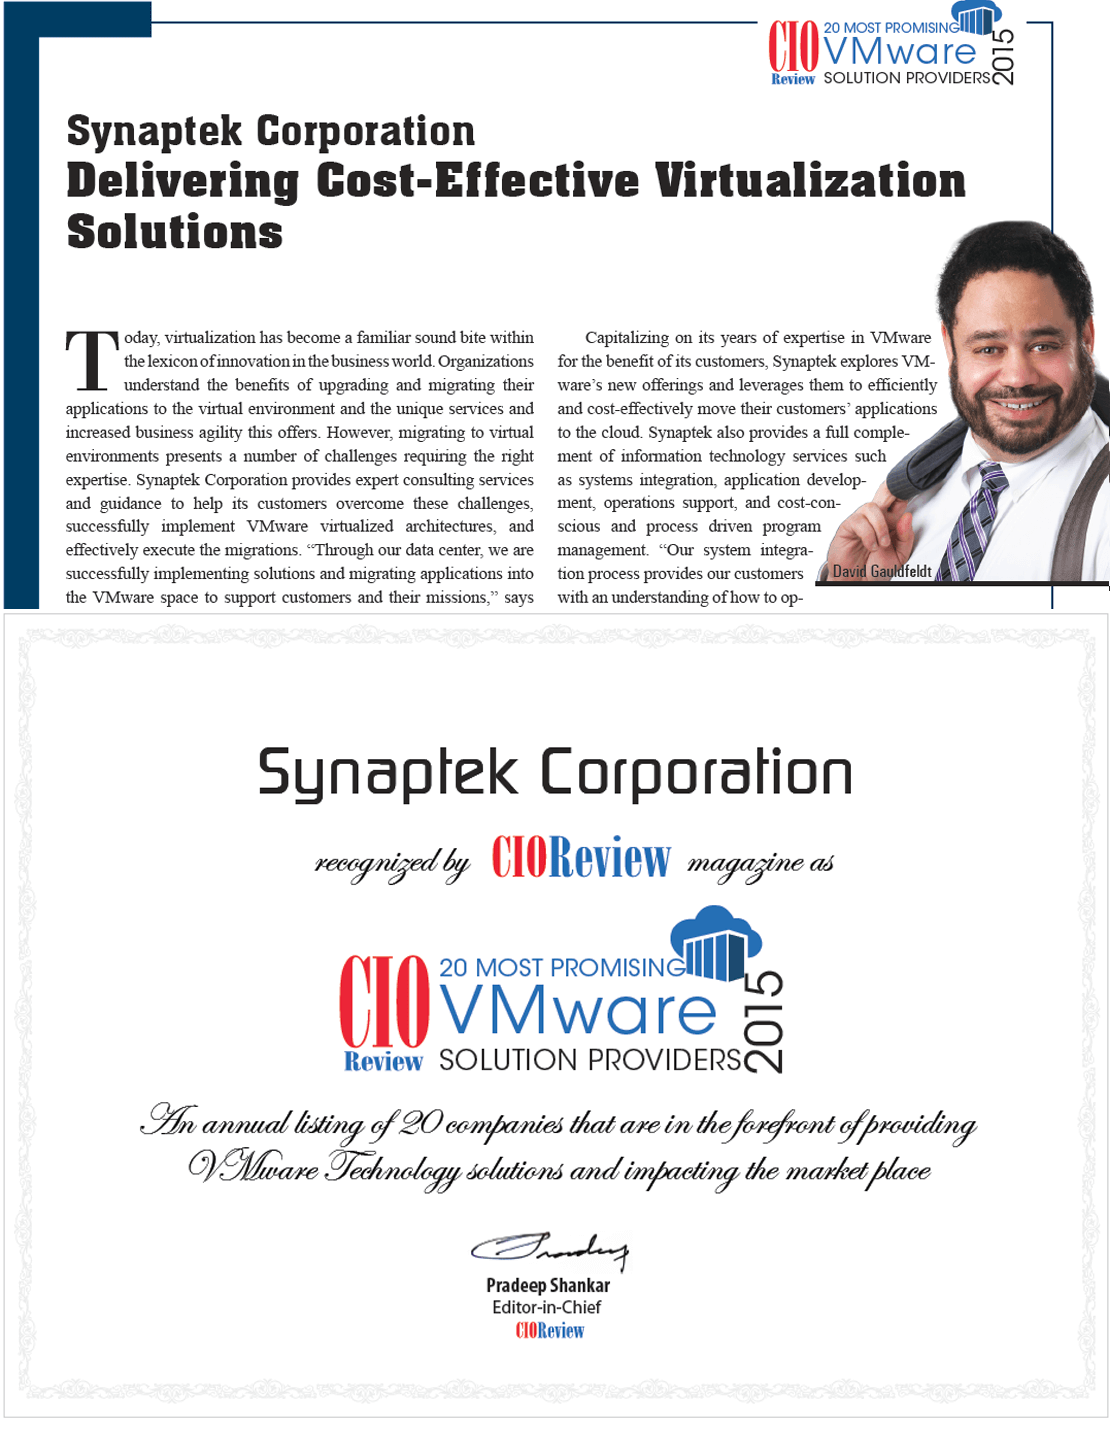 TekSynap named in CIO Review as one of the 20 Most Promising VMware Solution Providers